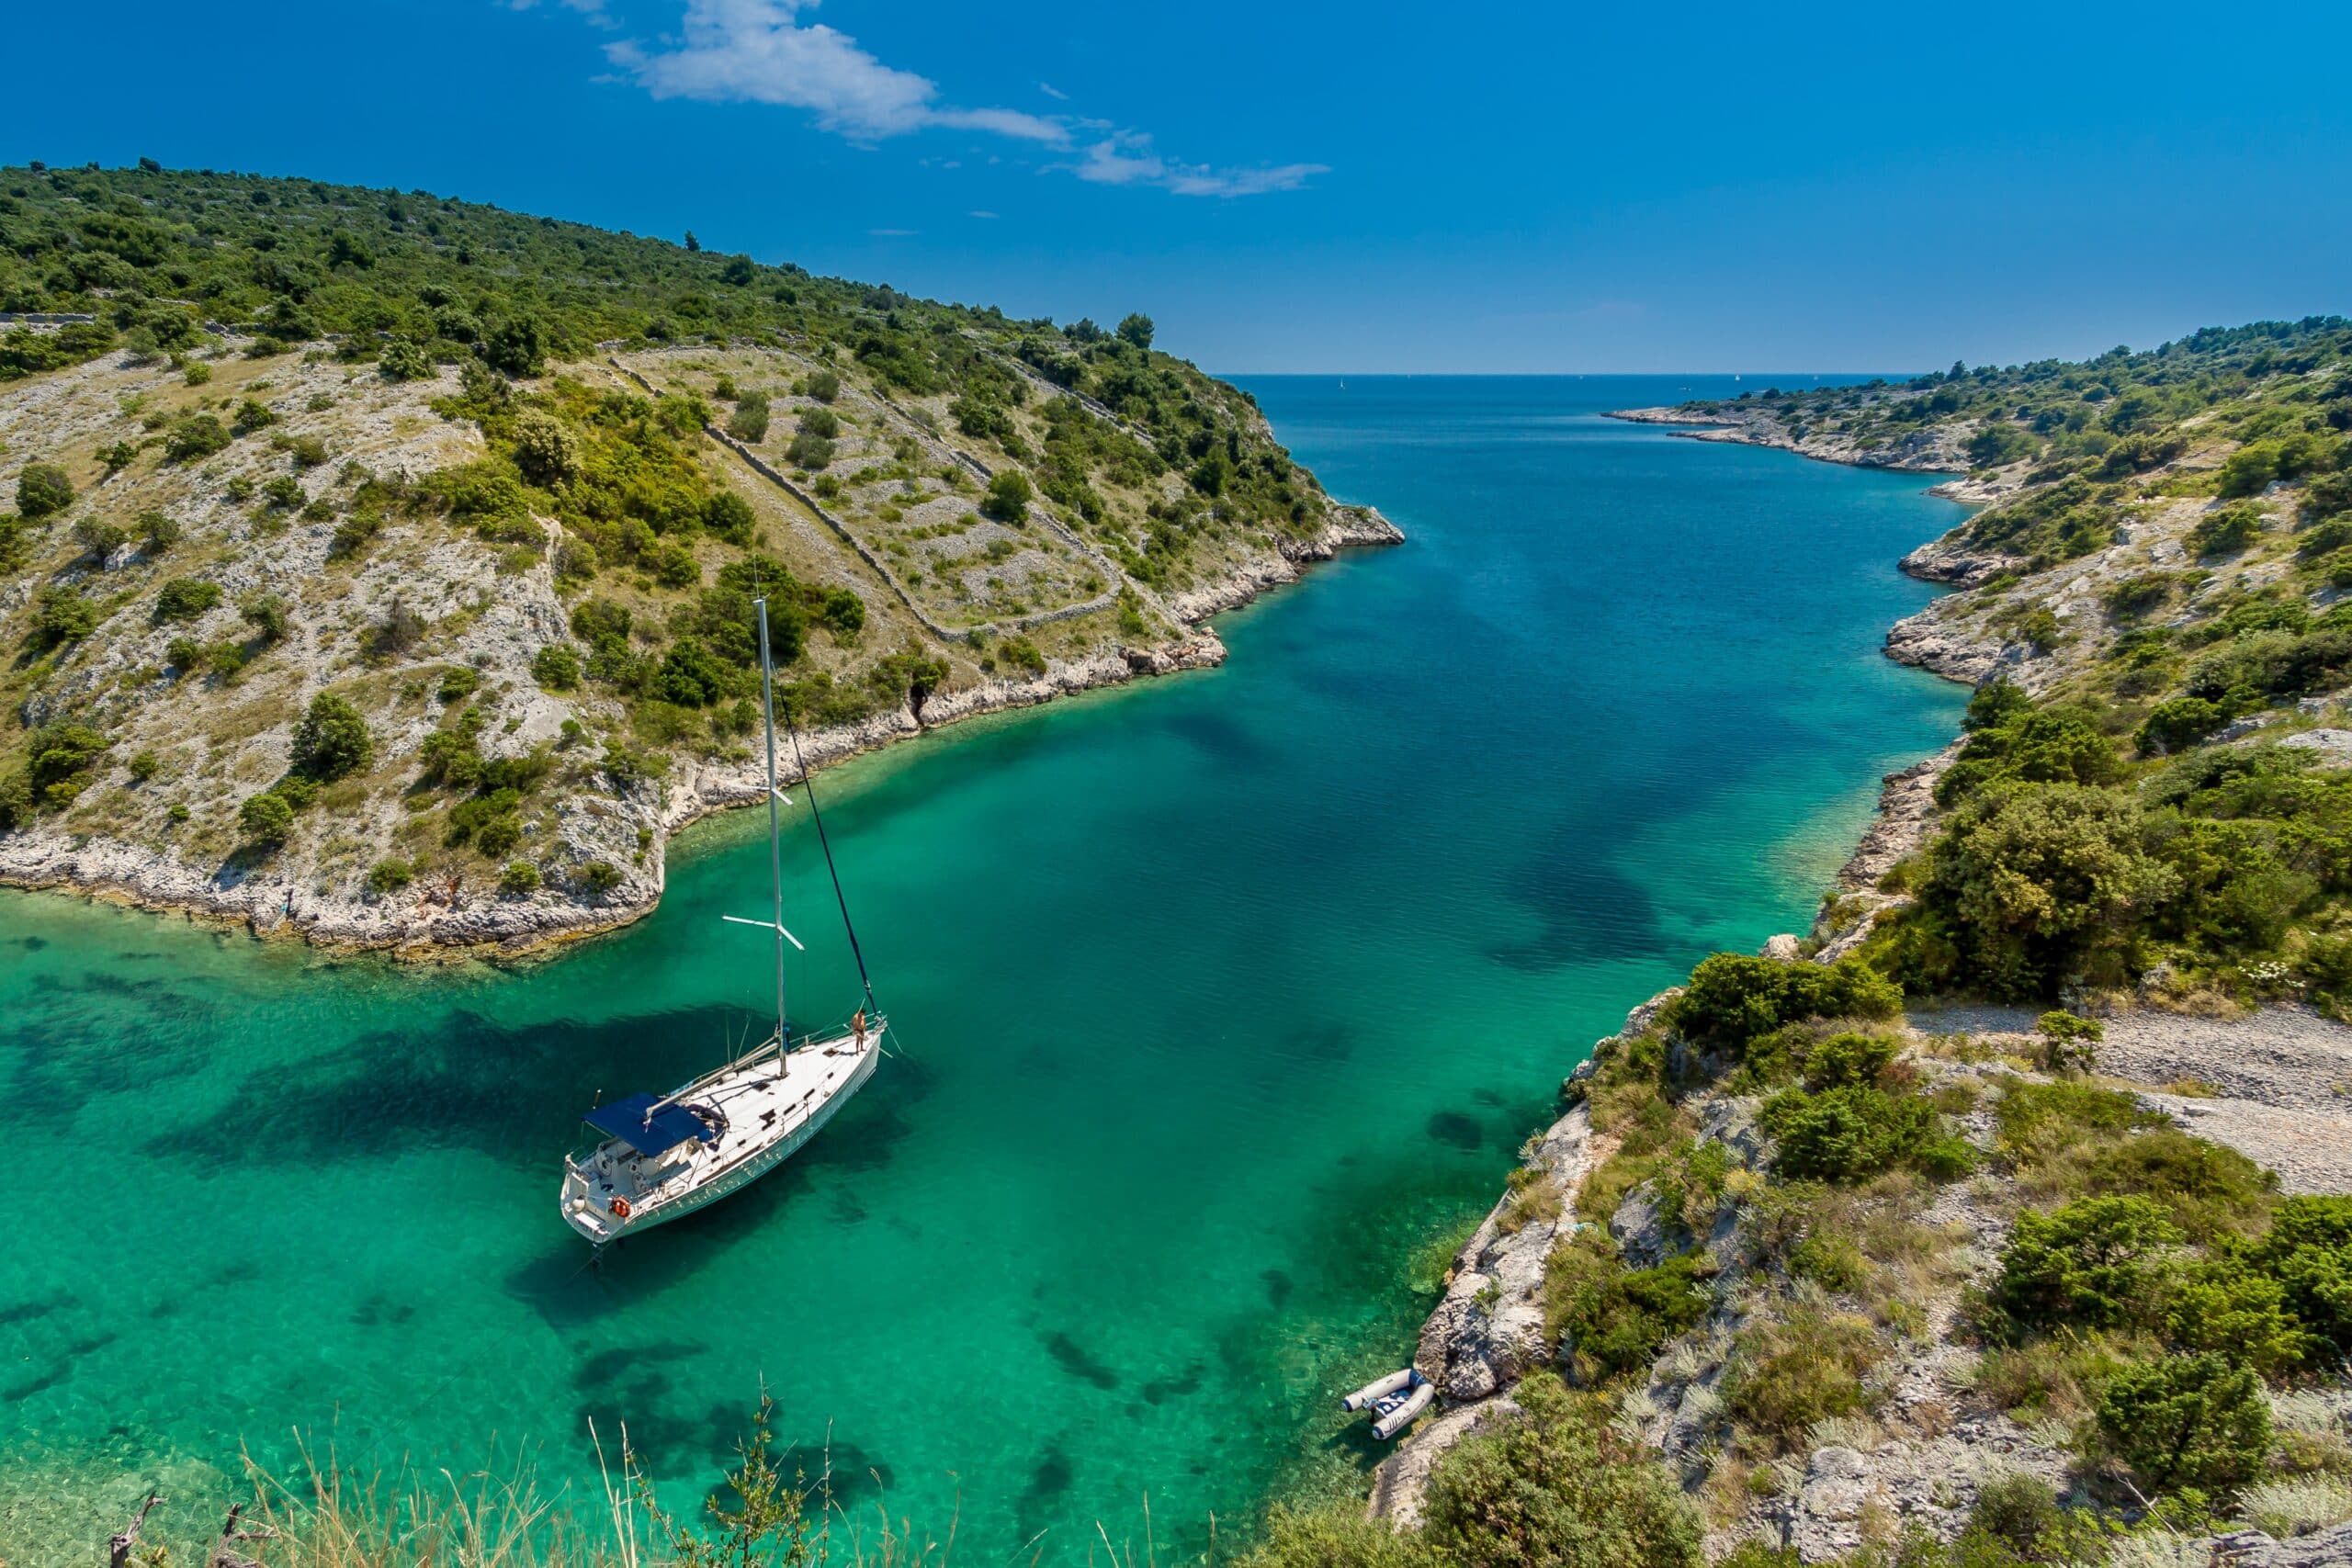 Croatia on a Budget: Island Hop Without Breaking the Bank